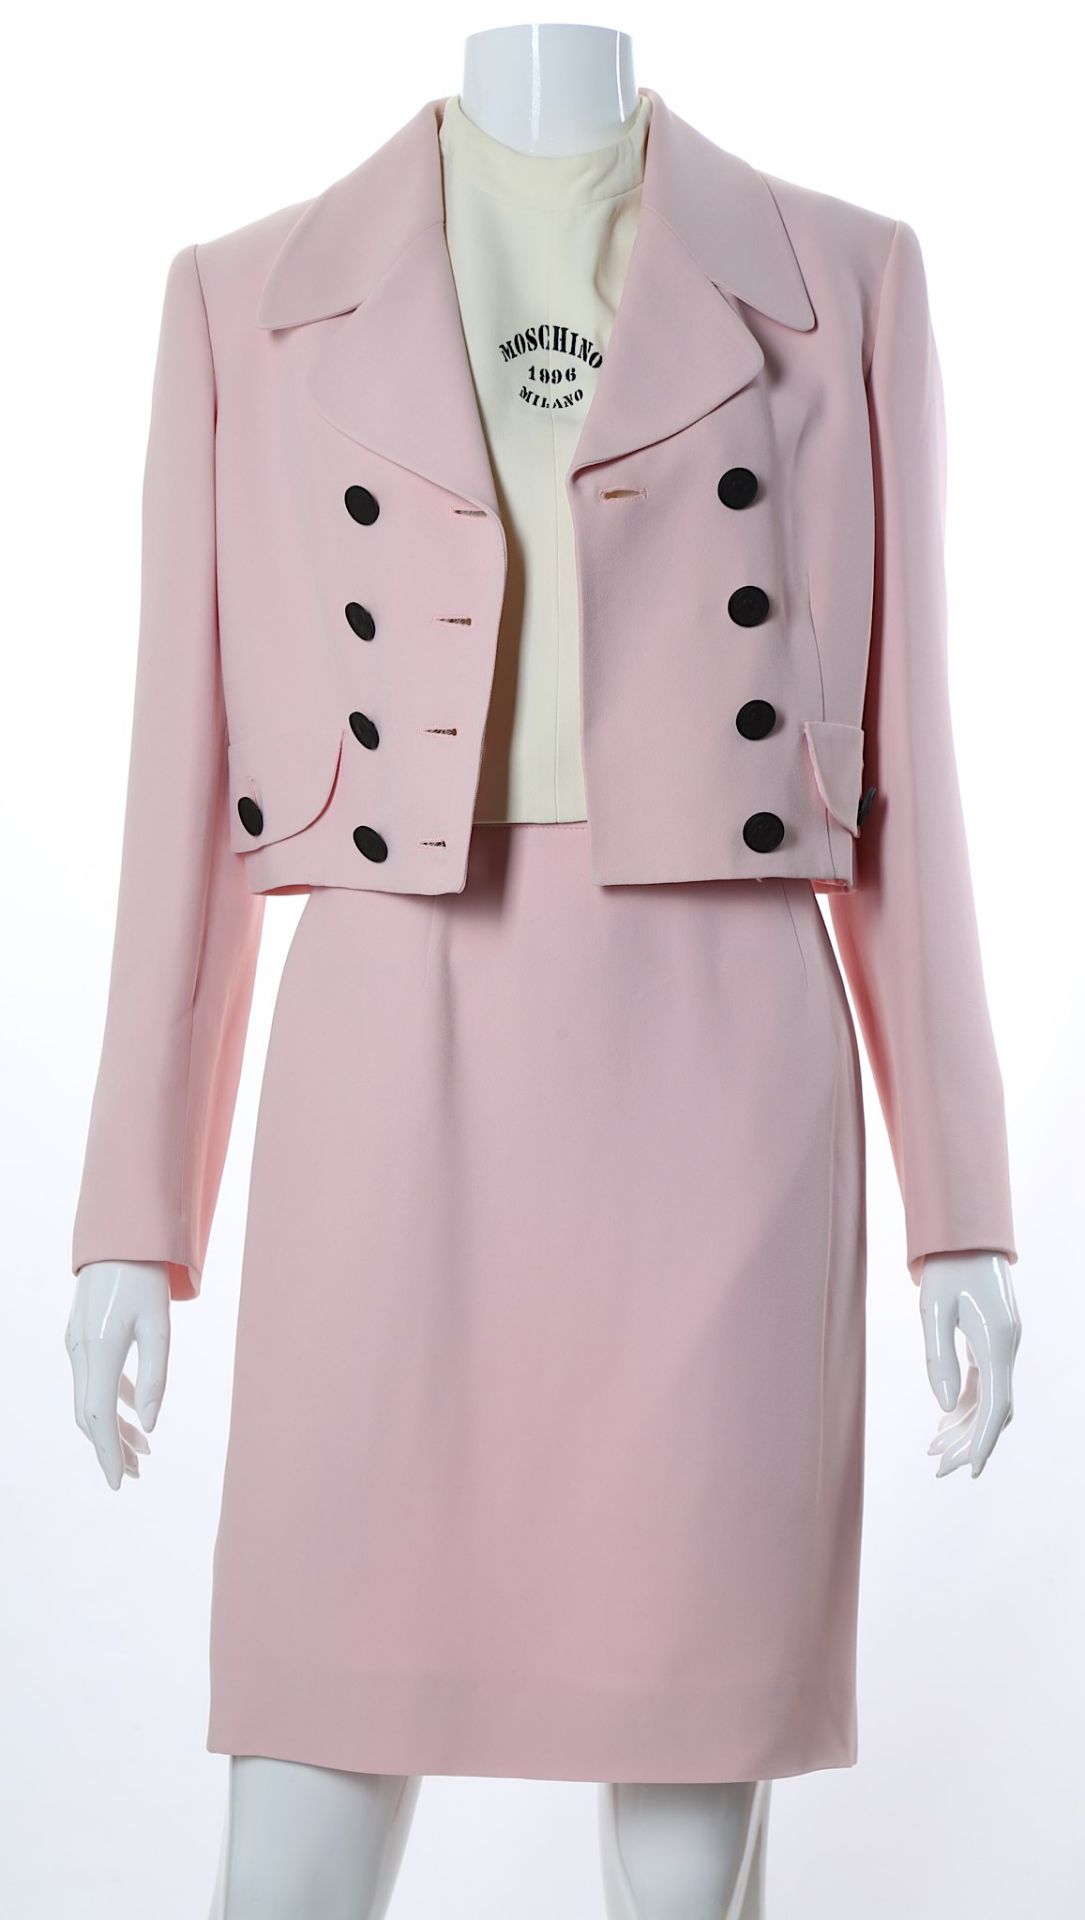 Moschino Cheap and Chic Pink Skirt Suit, 1990s, wi - Image 3 of 10